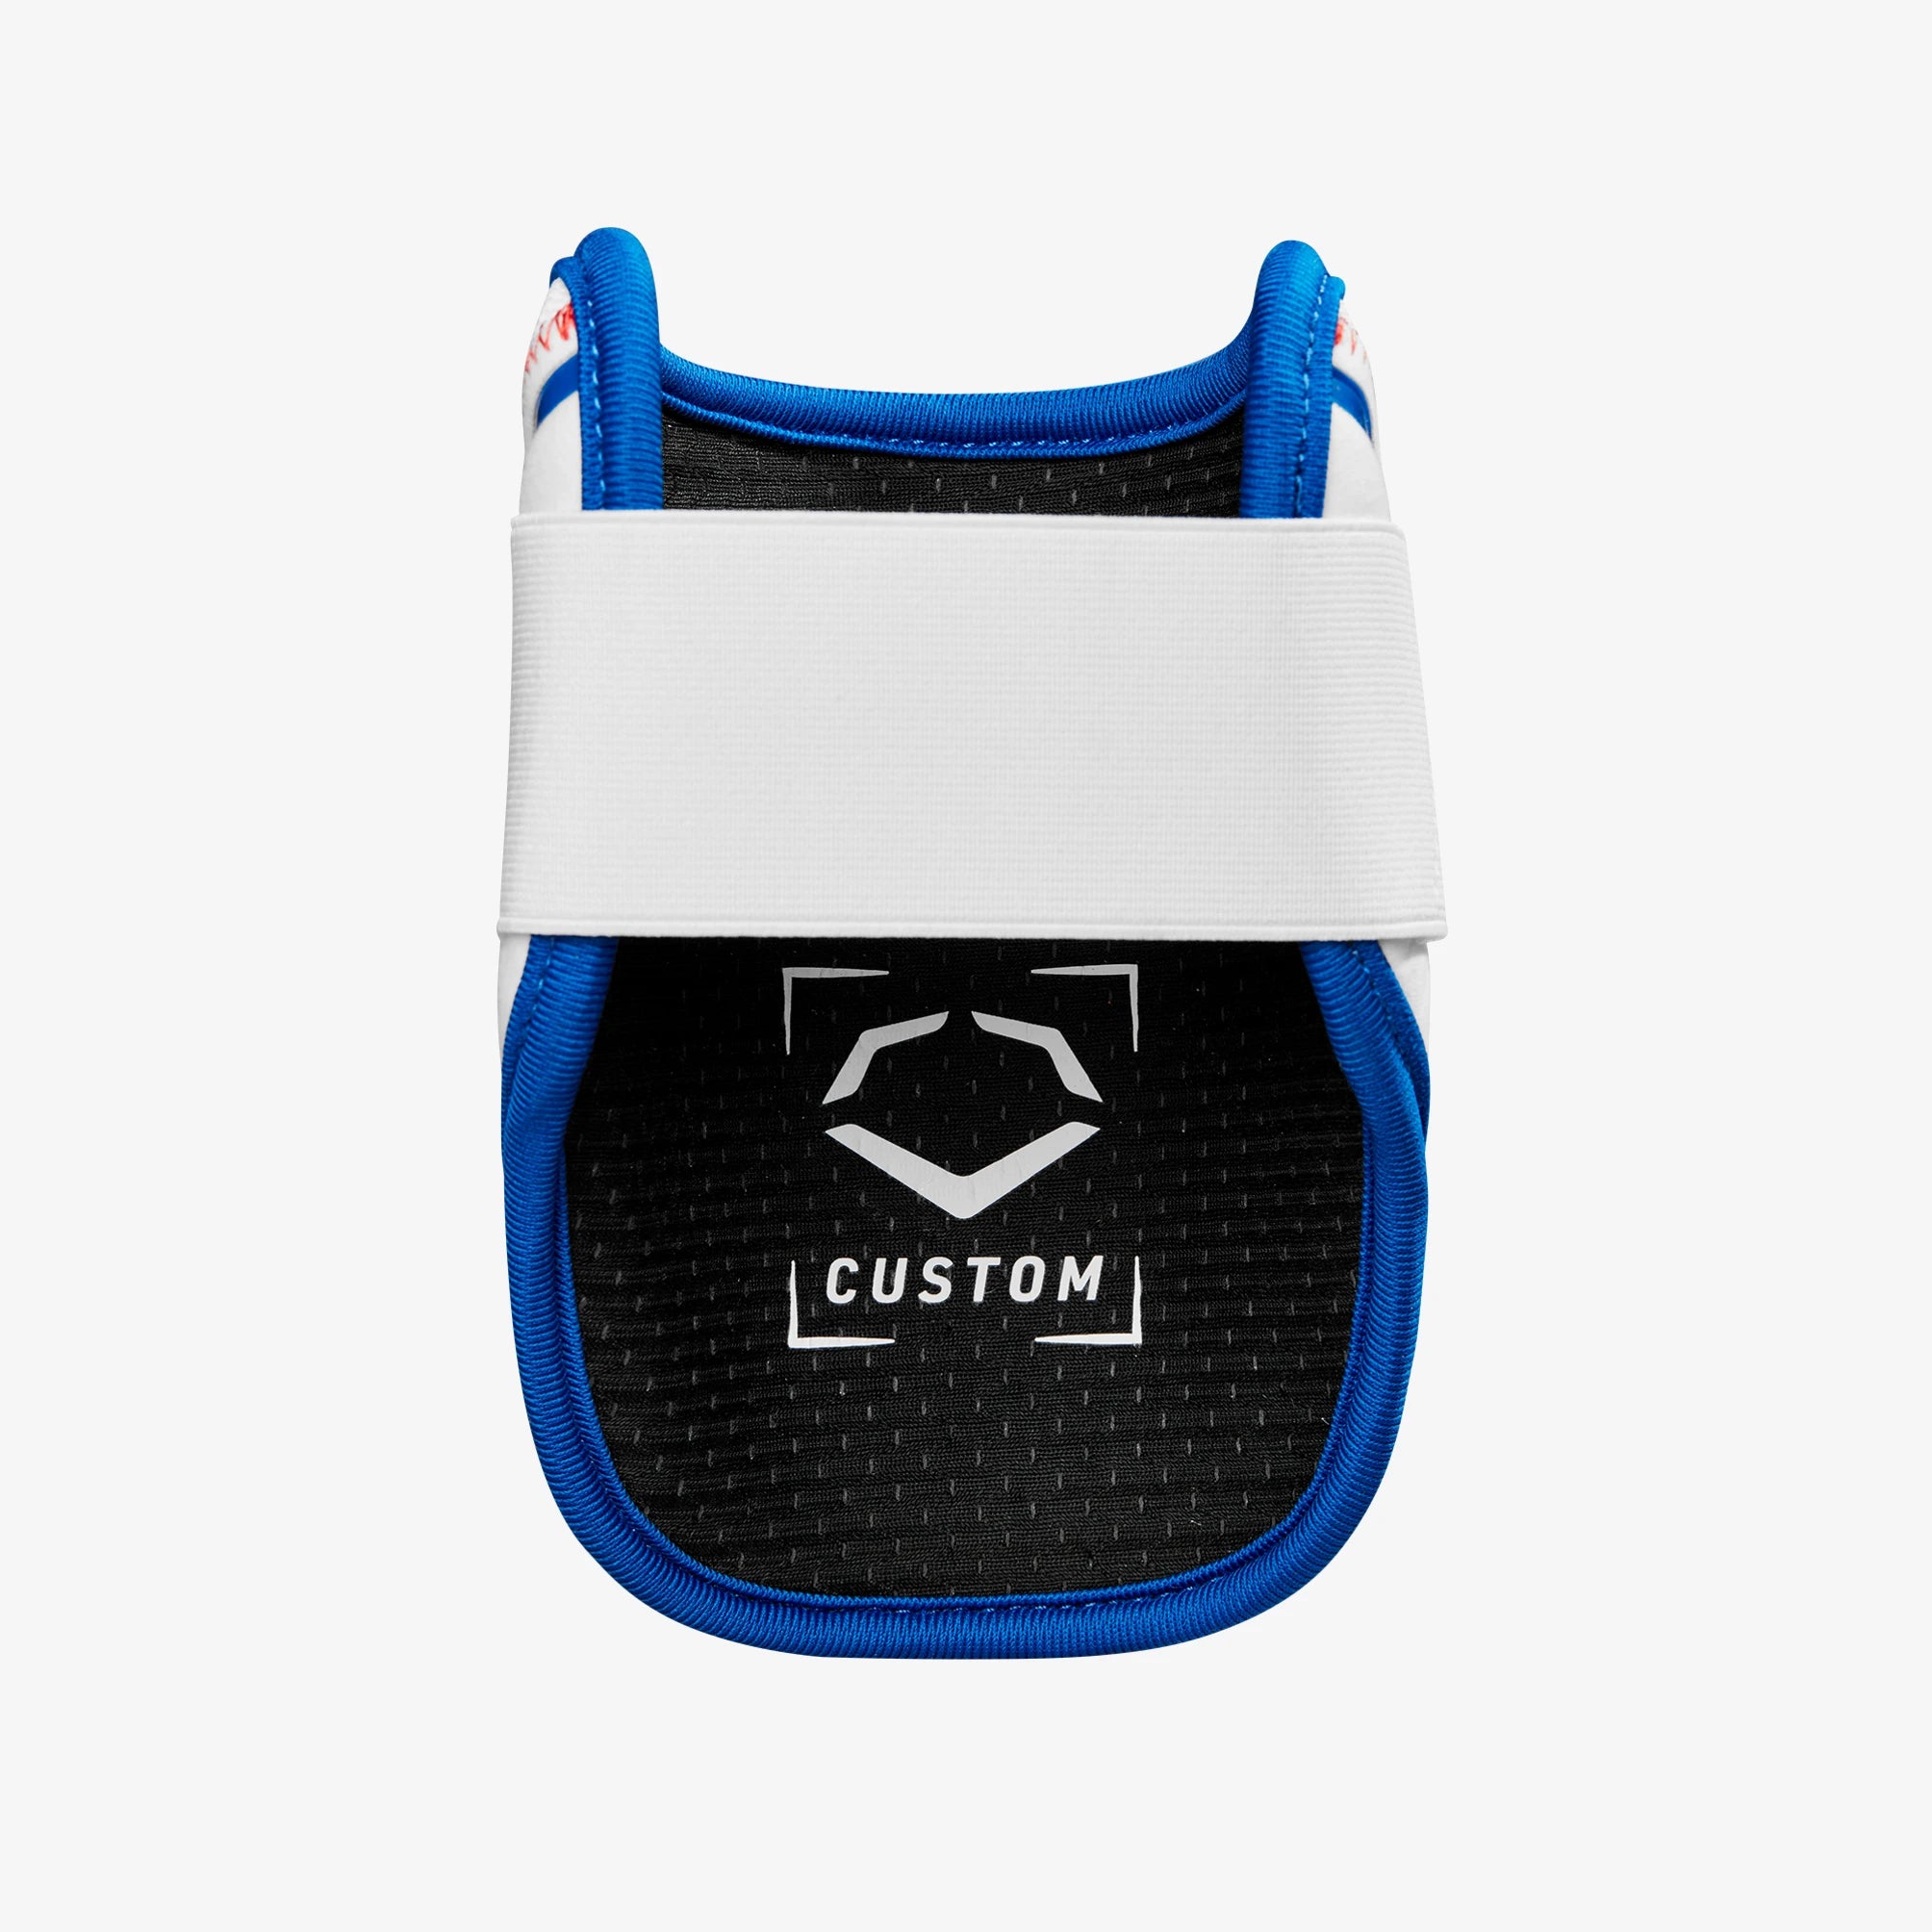 EvoShield PRO-SRZ 2.0 ON FIELD COLLECTION BATTER'S ELBOW GUARD: DODGERS